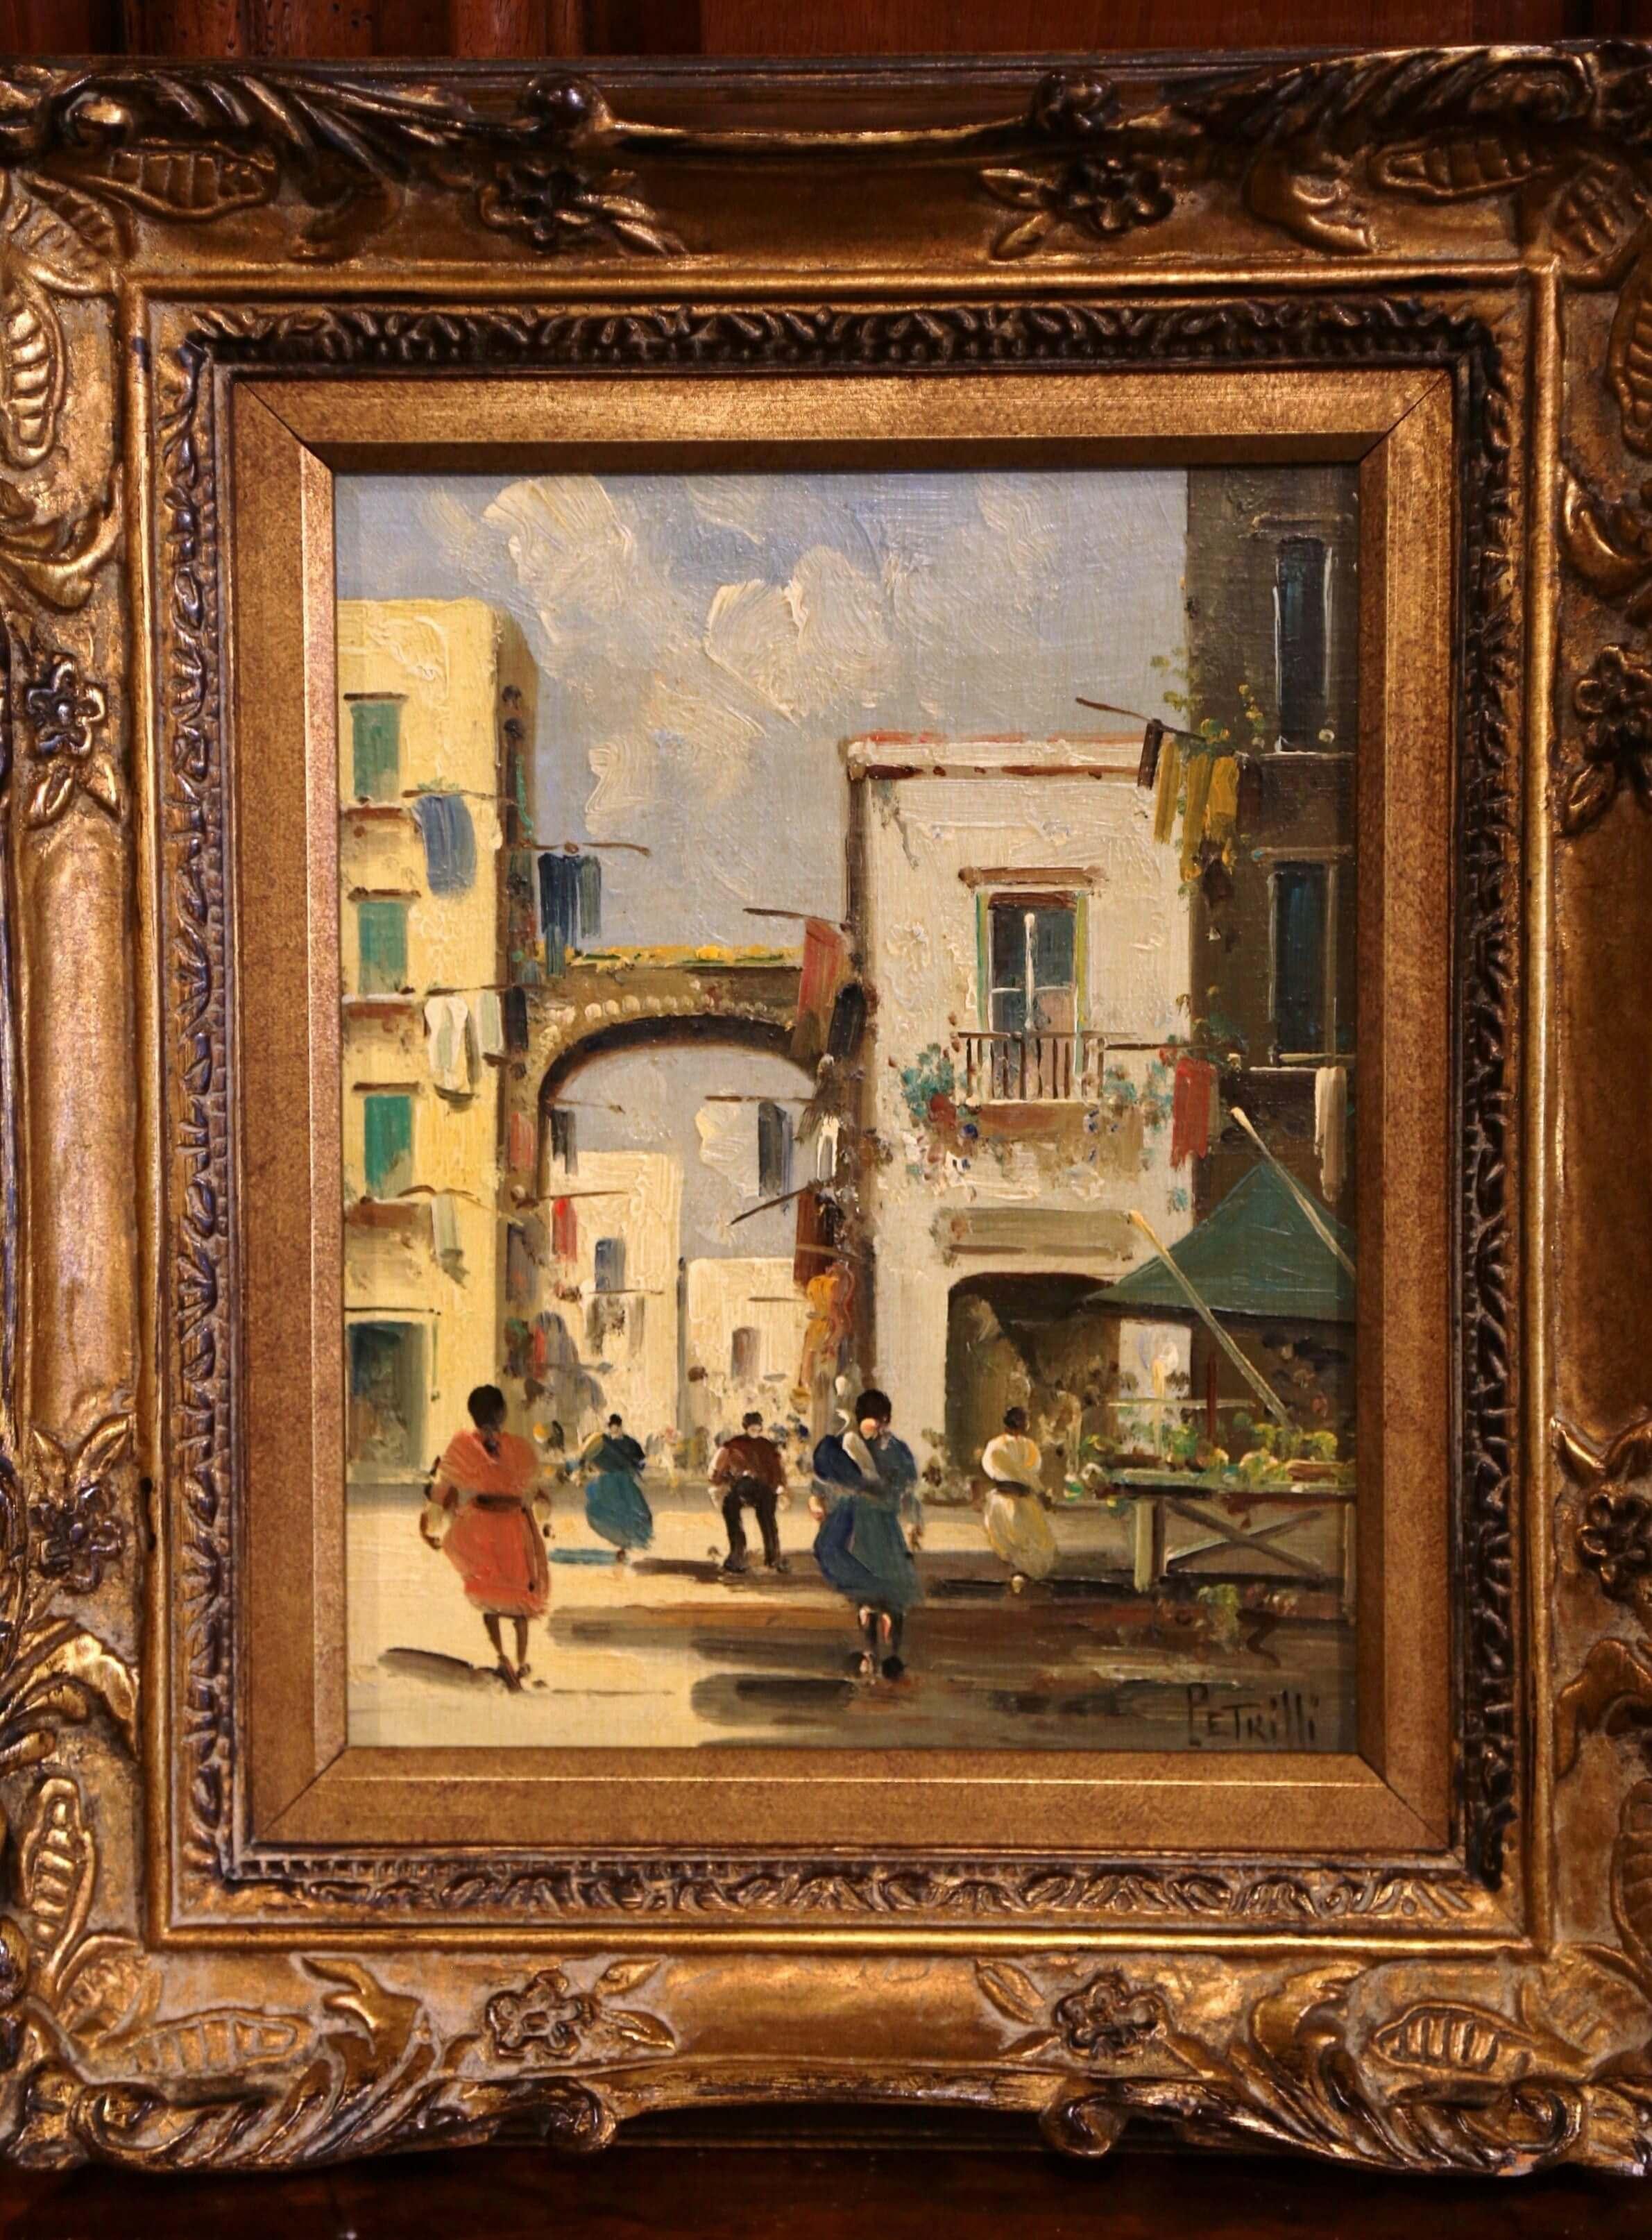 This oil on canvas painting was created in Italy, circa 1920. Set inside the original carved gilt frame, this painting depicts a European city scene bustling with people walking down the street. Buildings and anonymous figures diminish in size and